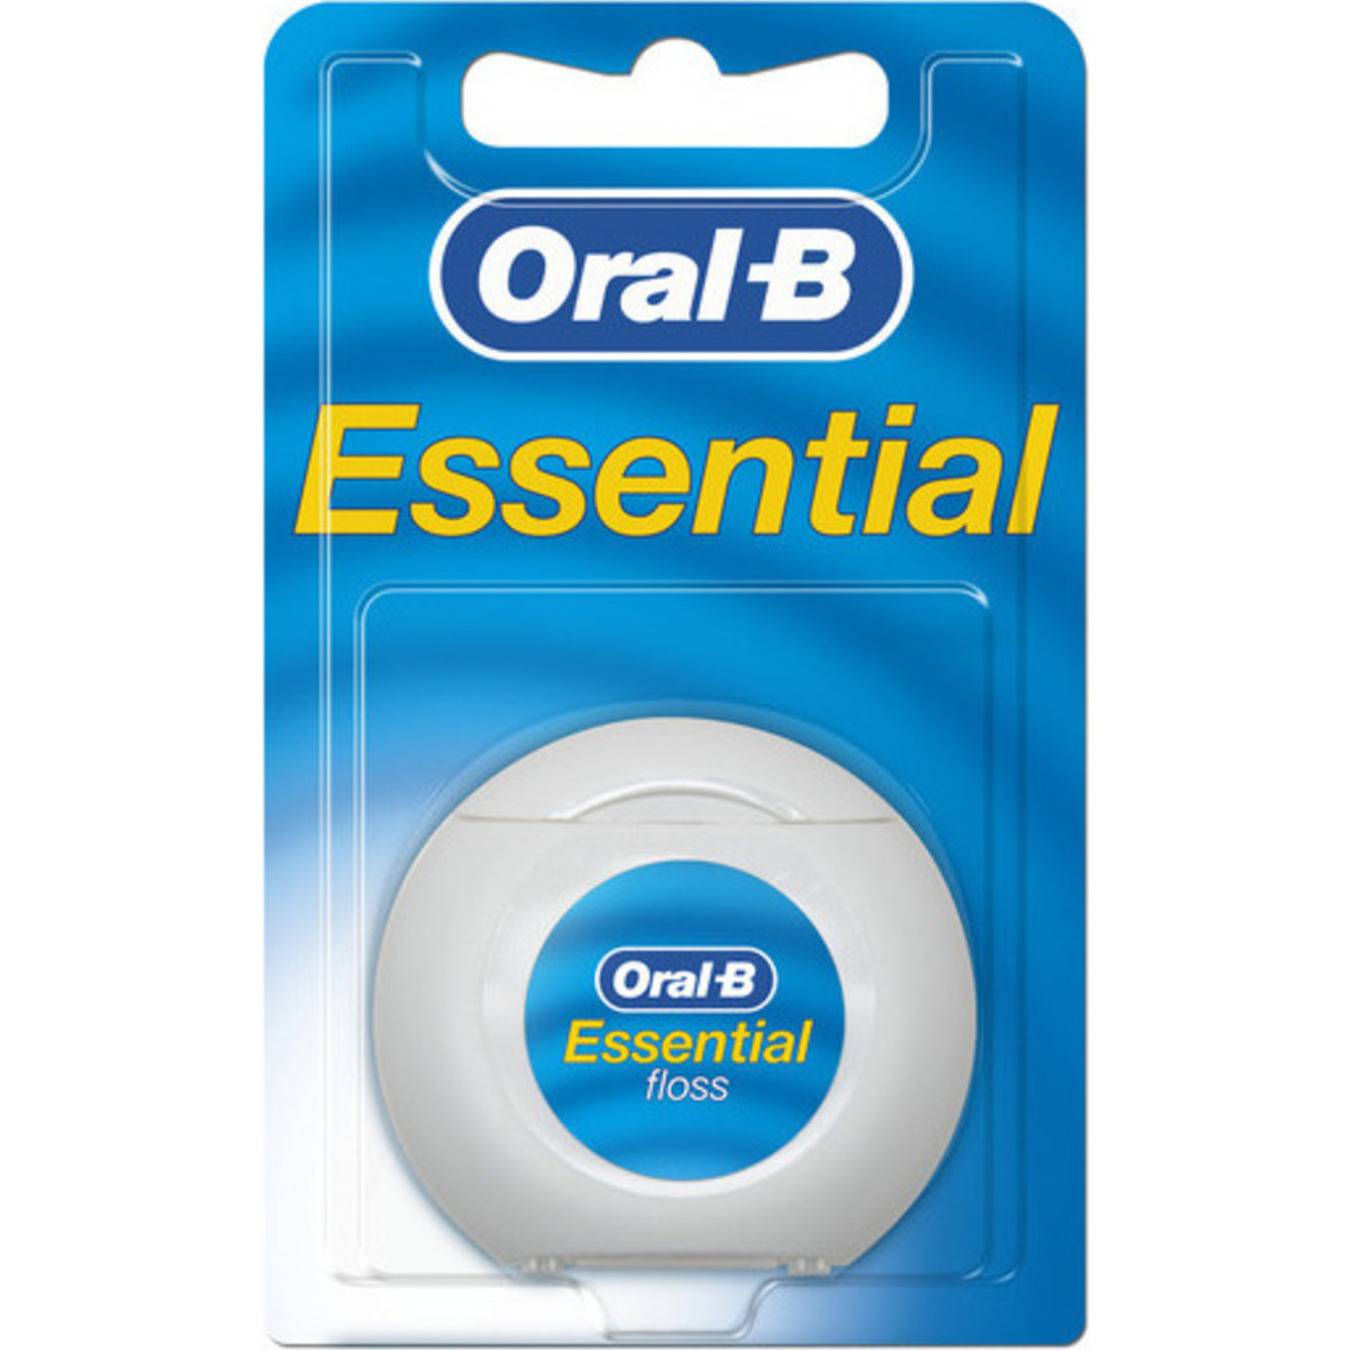 Зубна нитка Oral-B Essential floss Waxed м'ятна 50м